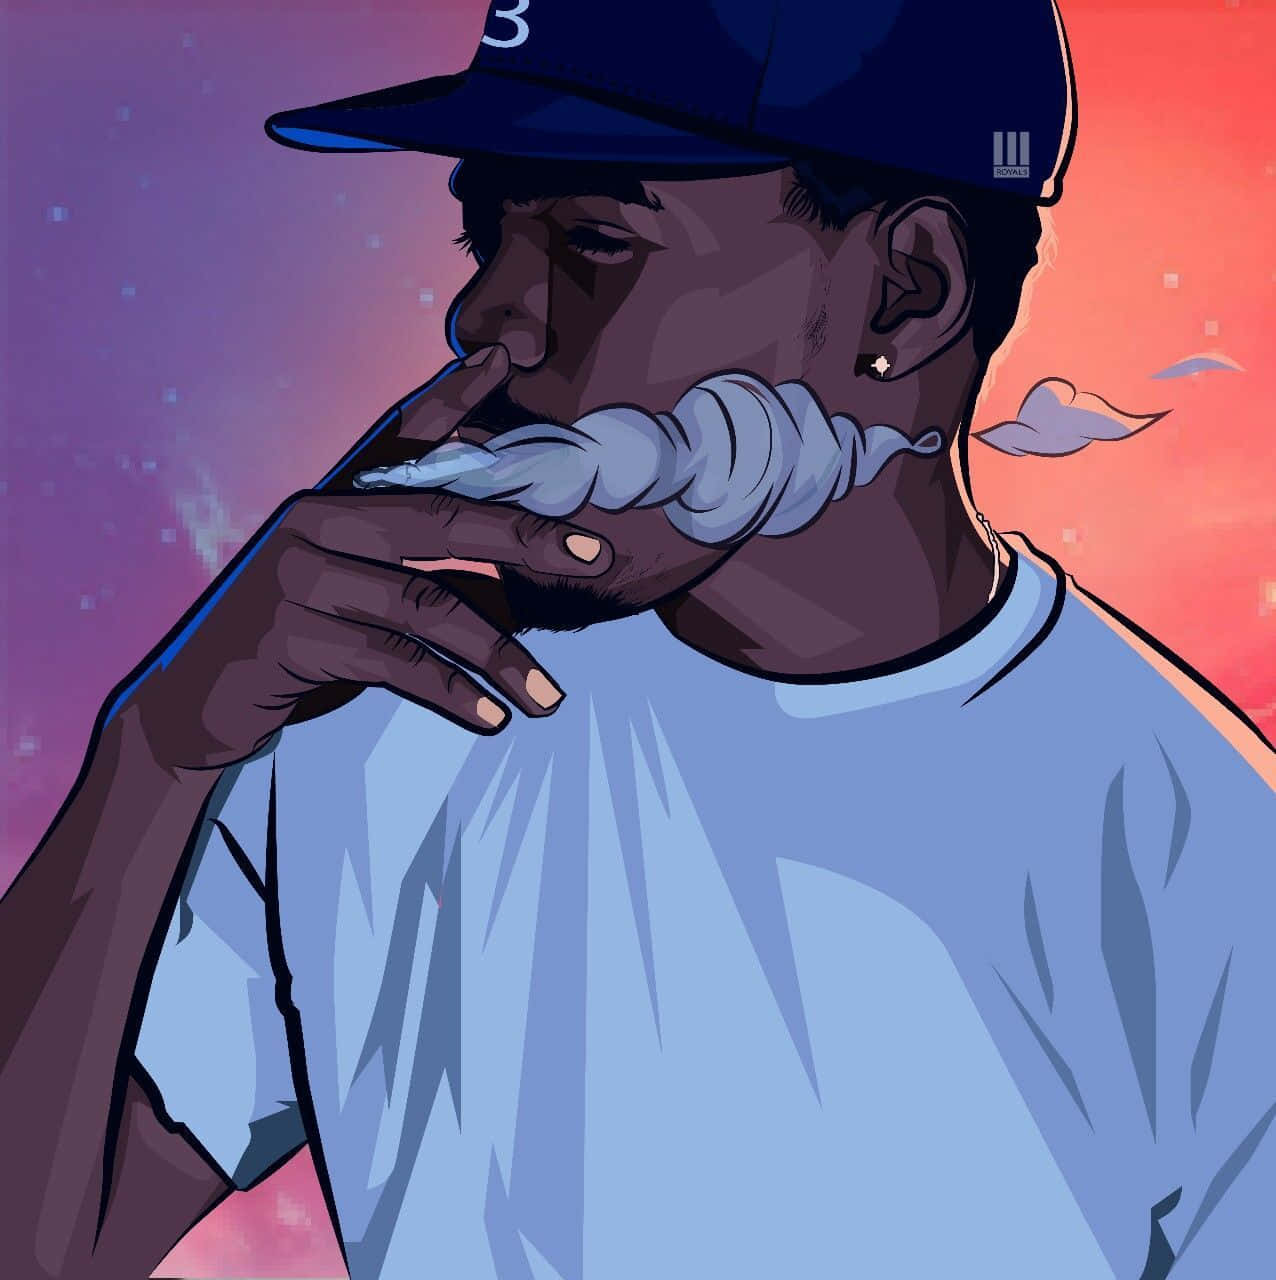 A digital illustration of a young black man smoking a joint. - Chance the Rapper